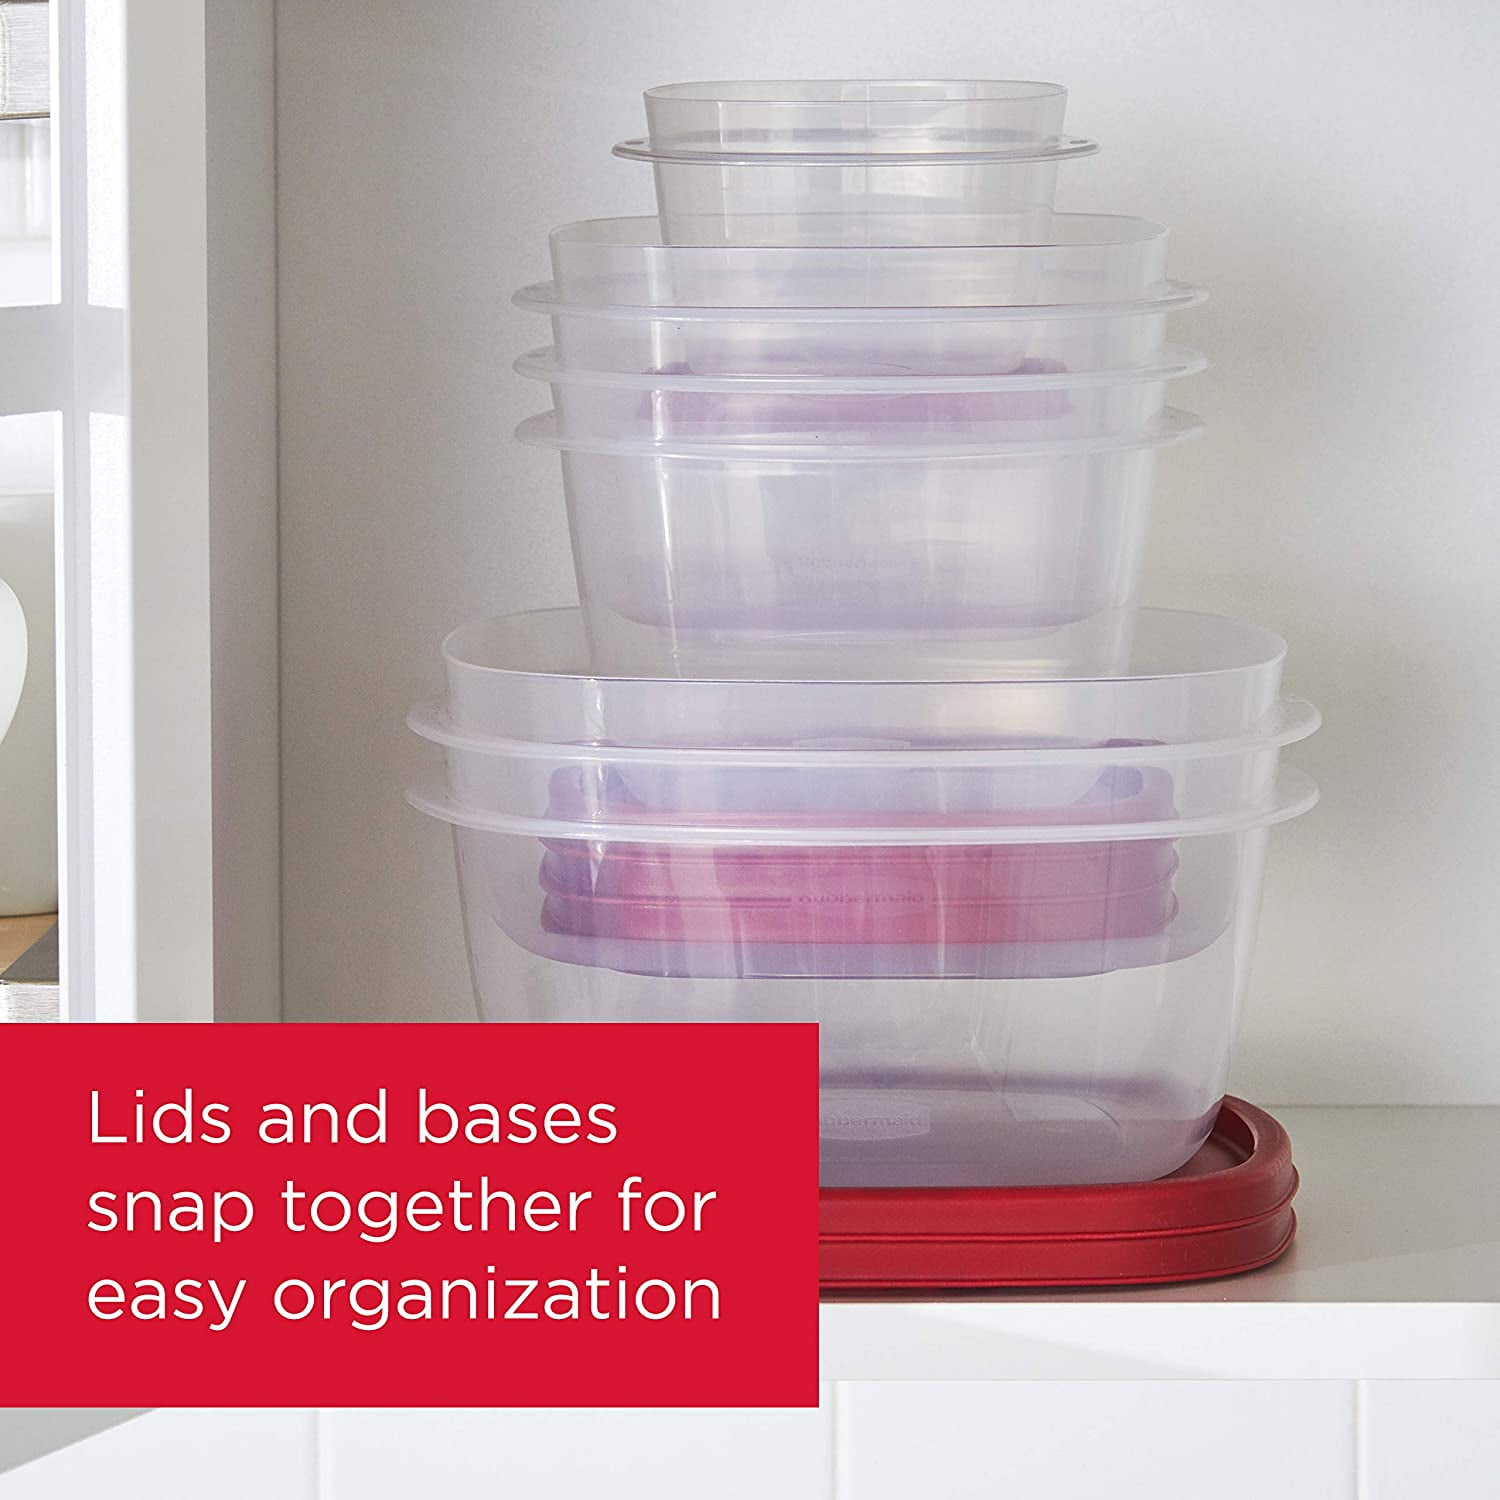 Rubbermaid® Easy-Find Lids Food Storage Container Set - Red/Clear, 4 pk -  Pick 'n Save